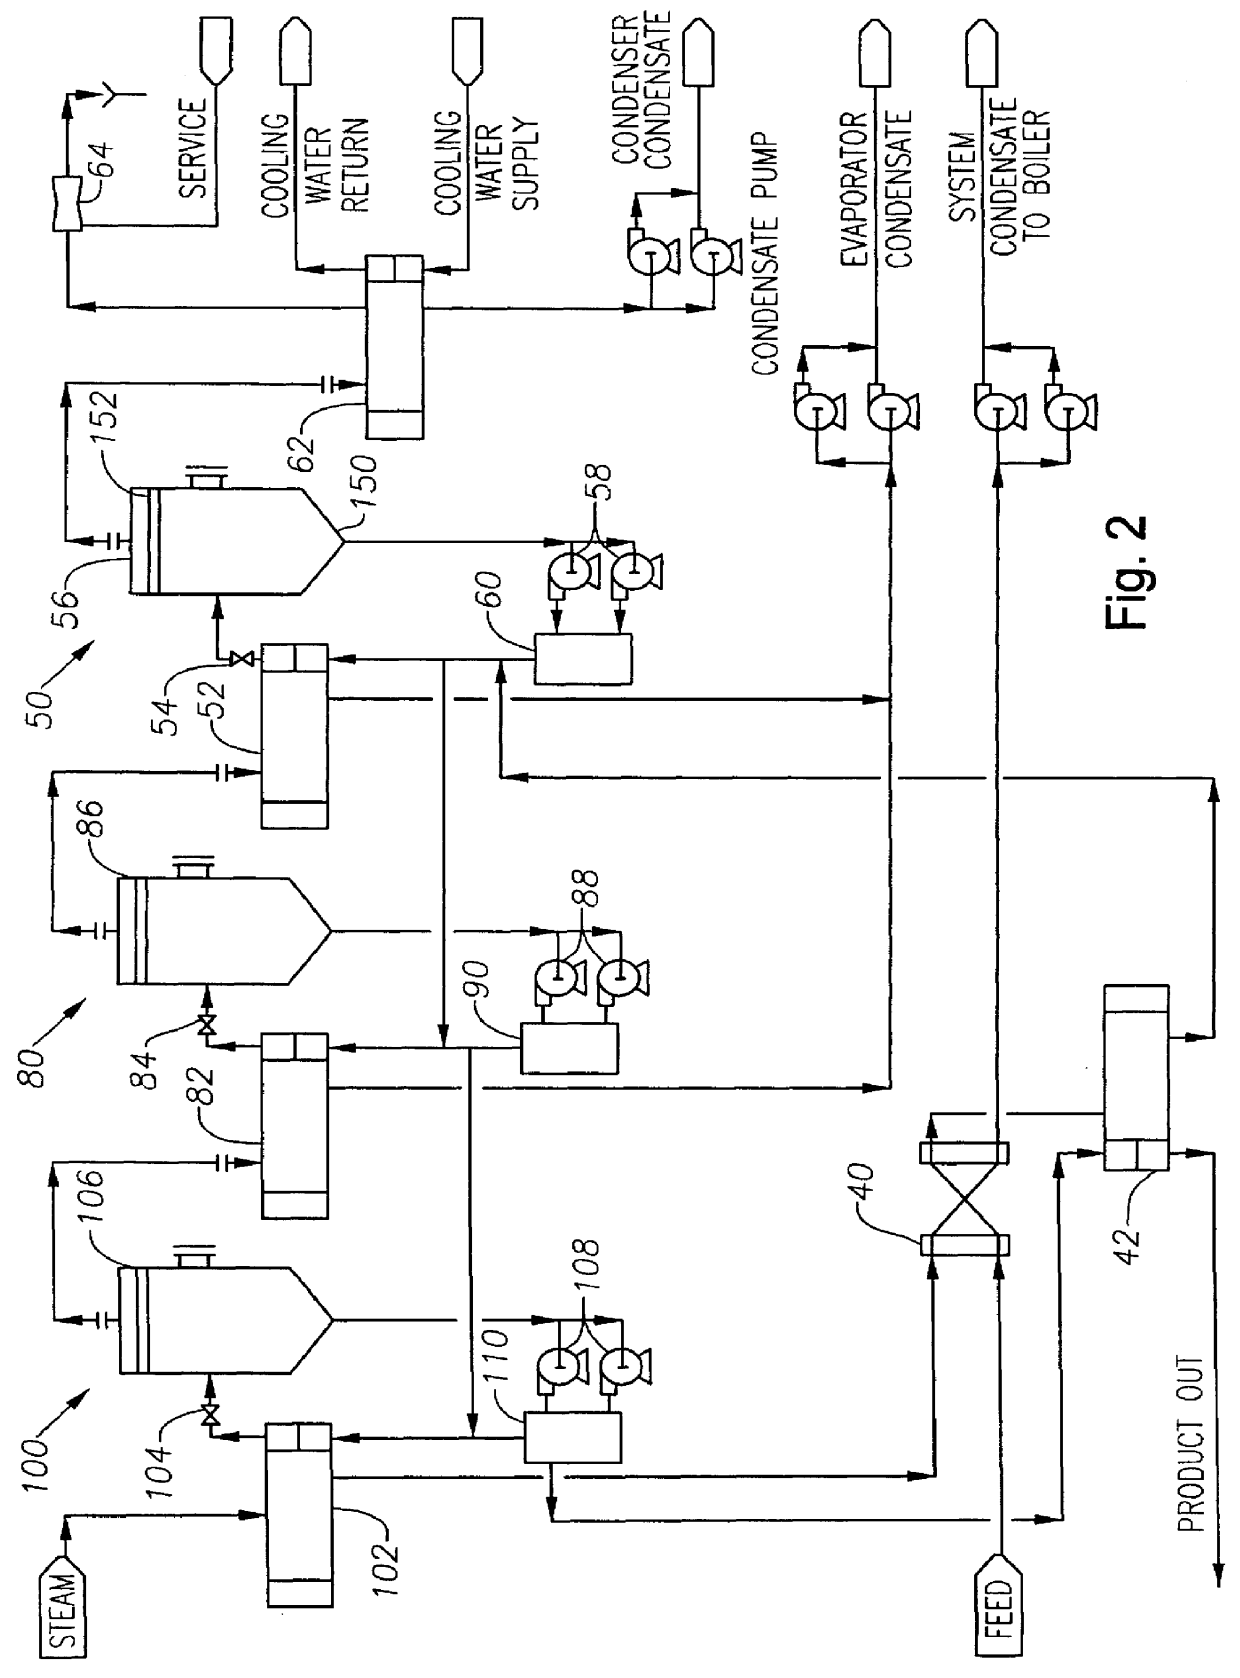 Process and system for recovering glycol from glycol/brine streams